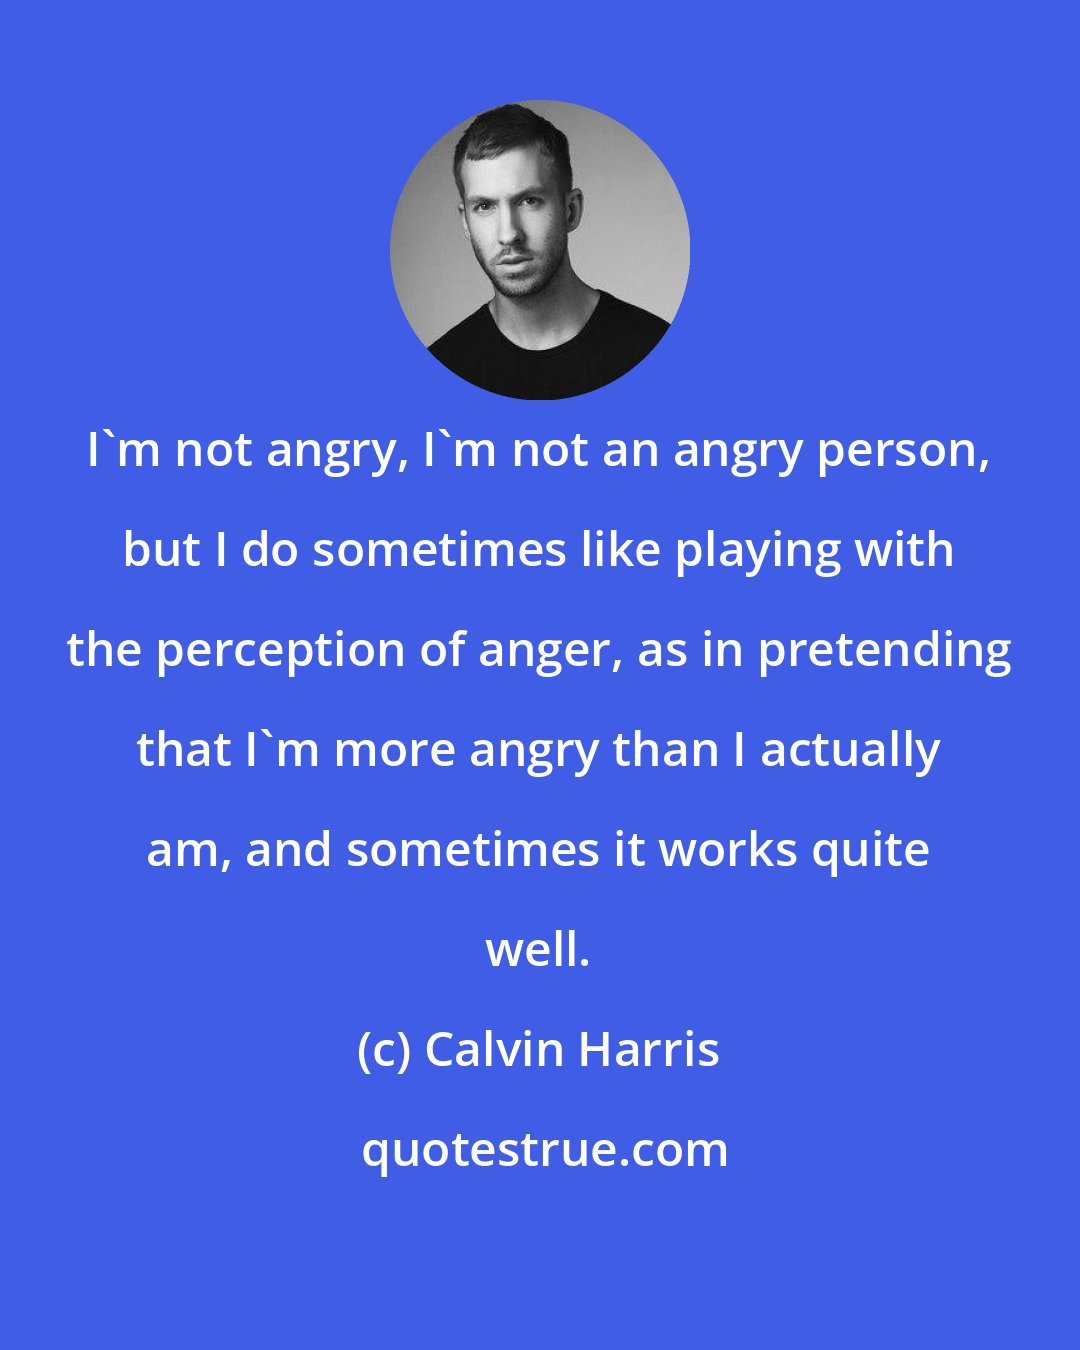 Calvin Harris: I'm not angry, I'm not an angry person, but I do sometimes like playing with the perception of anger, as in pretending that I'm more angry than I actually am, and sometimes it works quite well.